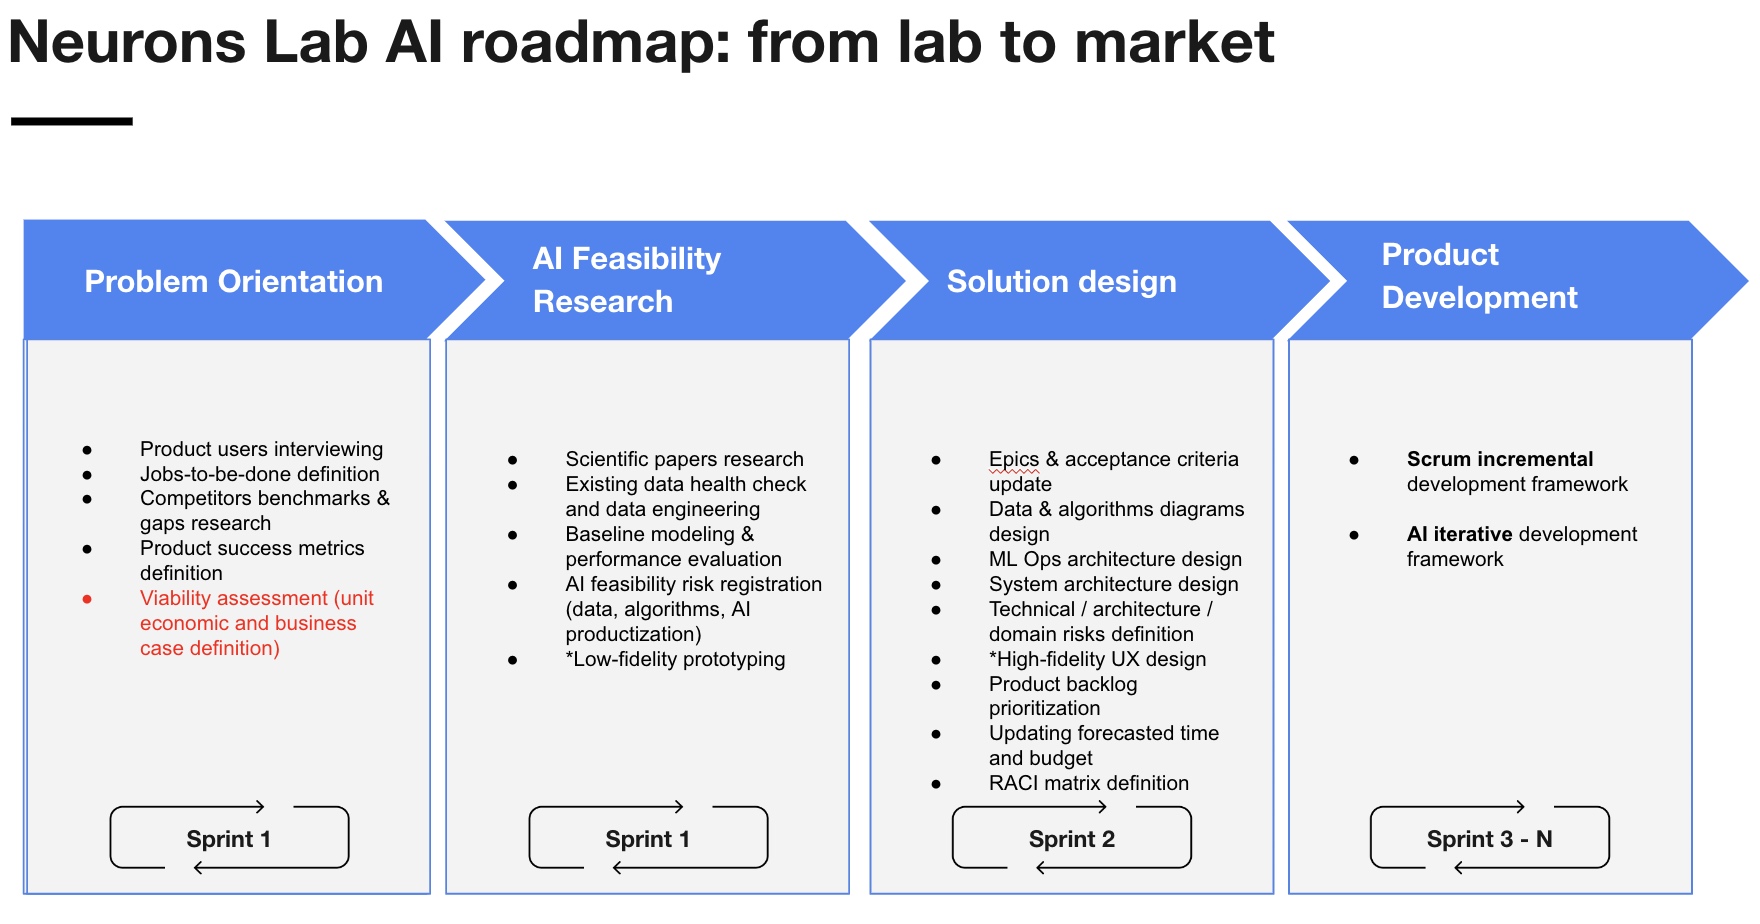 Neurons Lab AI roadmap: from lab to market